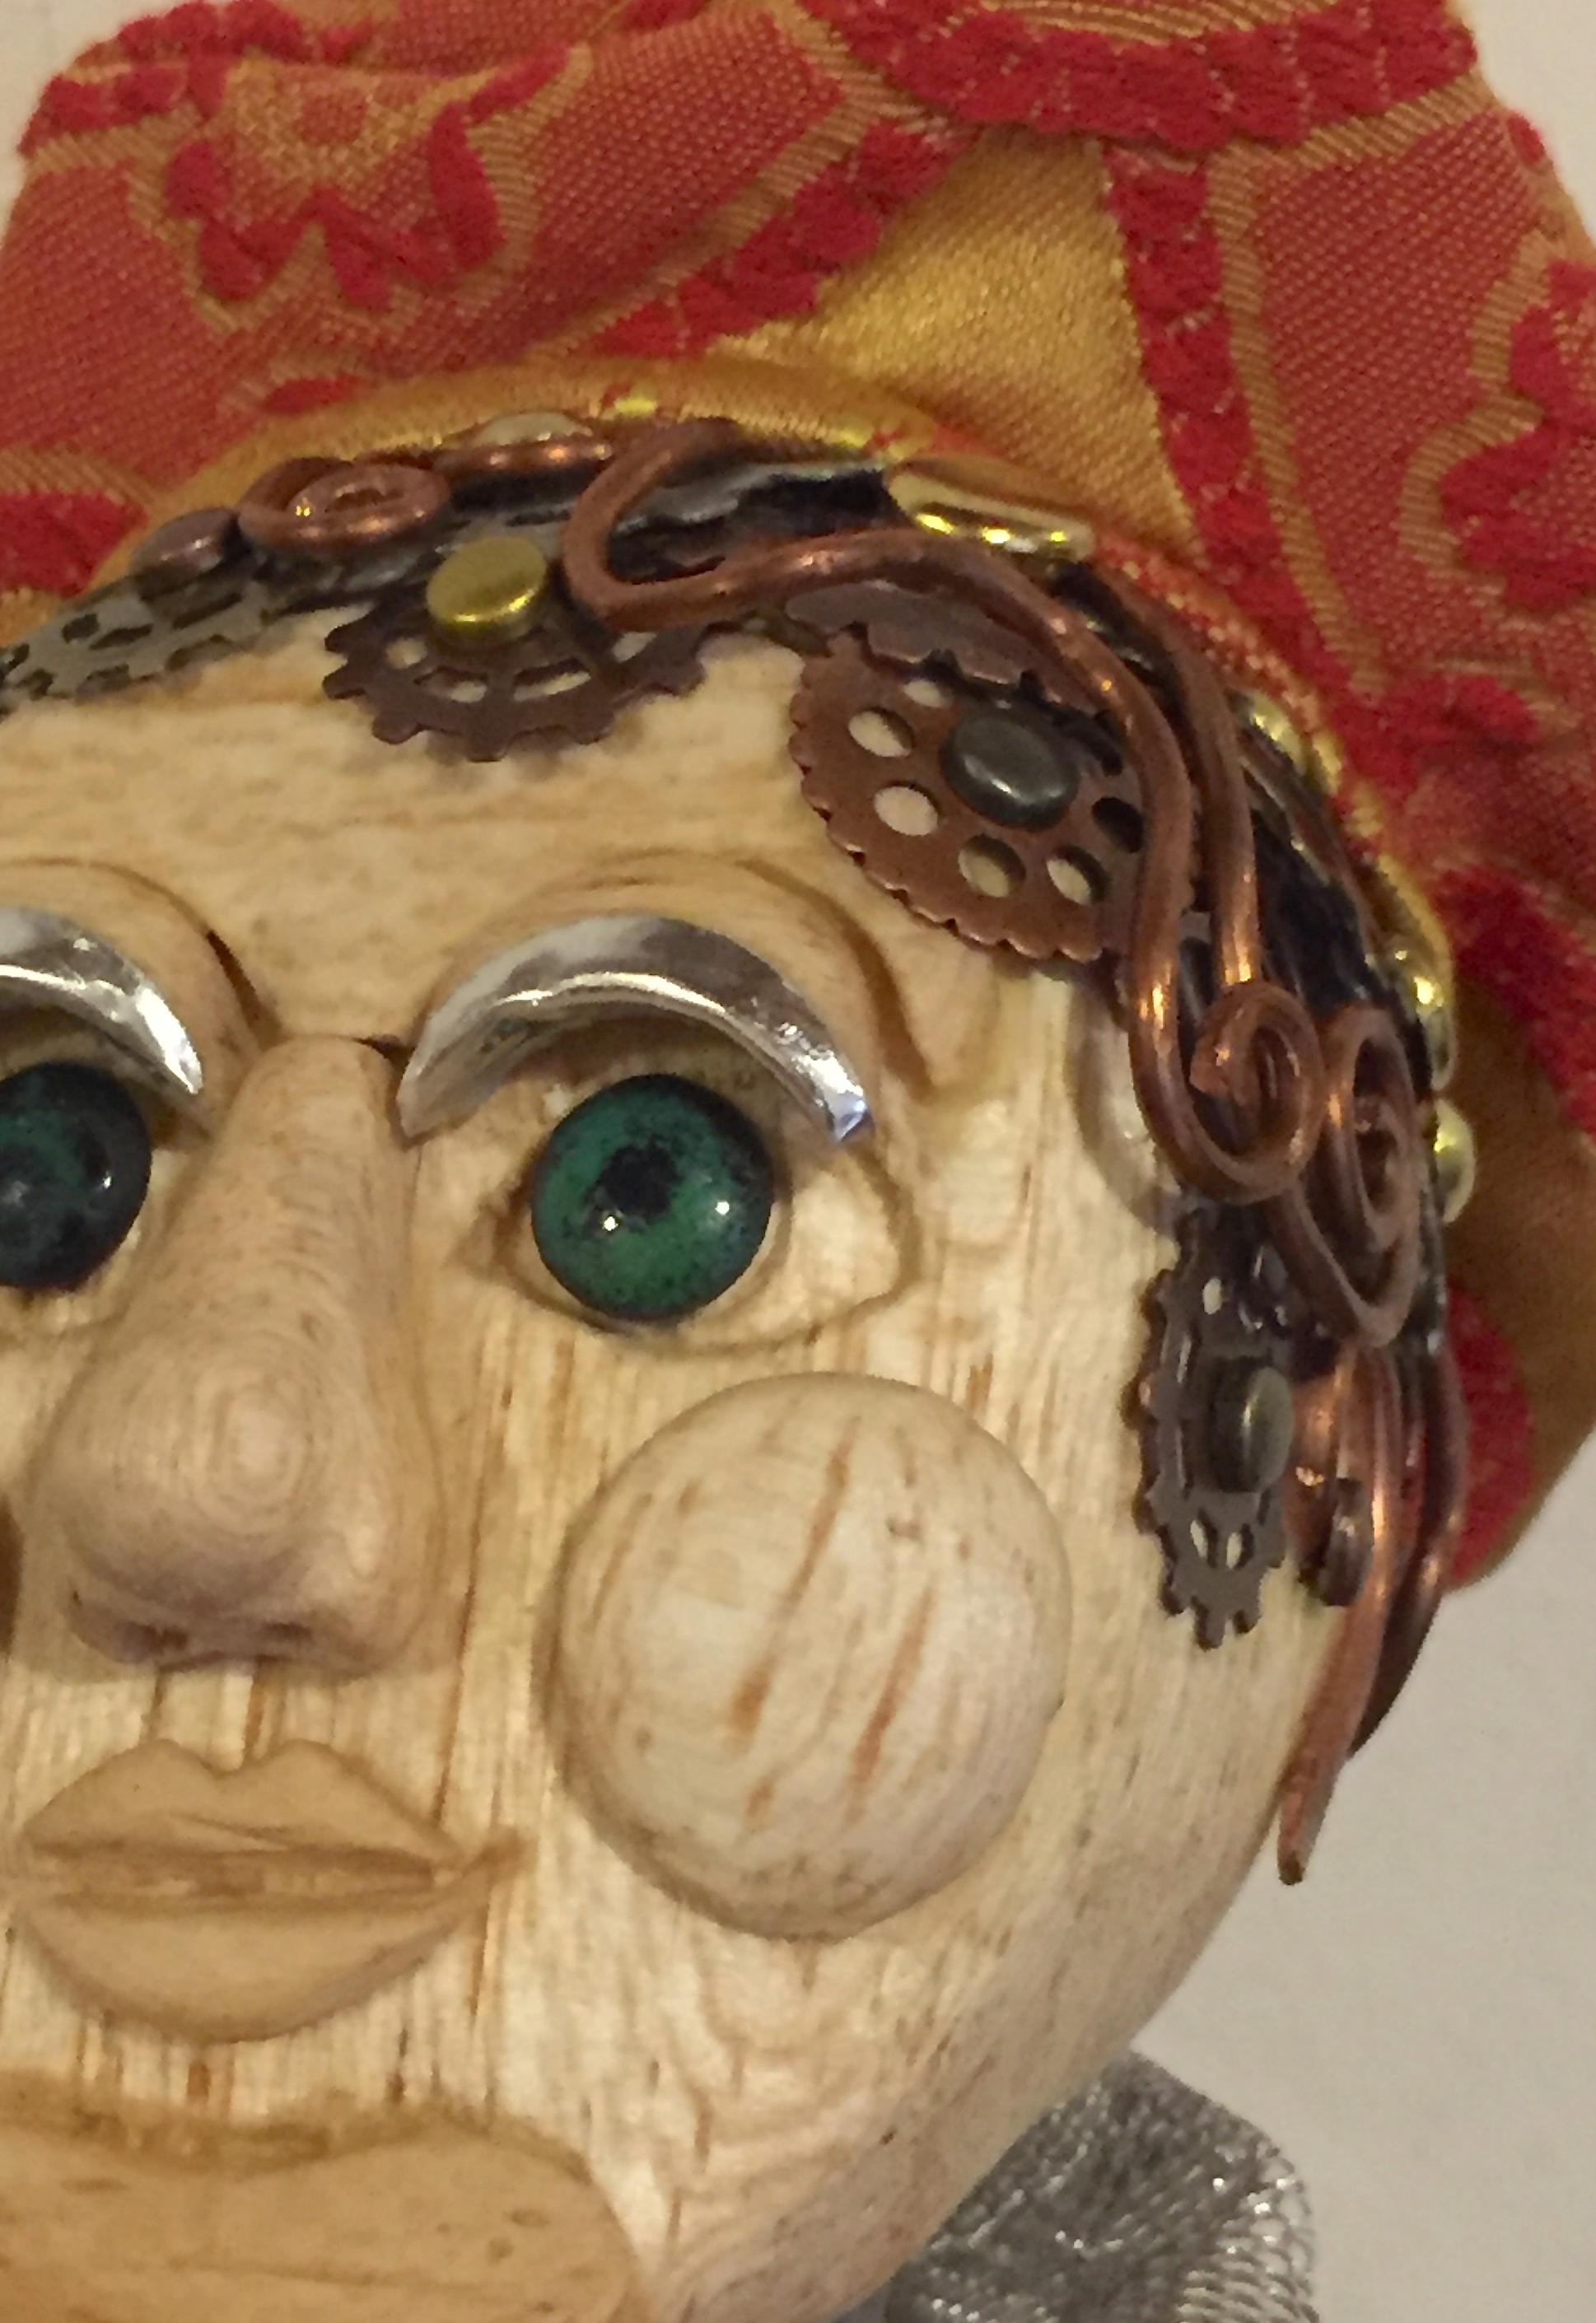 close up of facial features of Pinocchio art doll